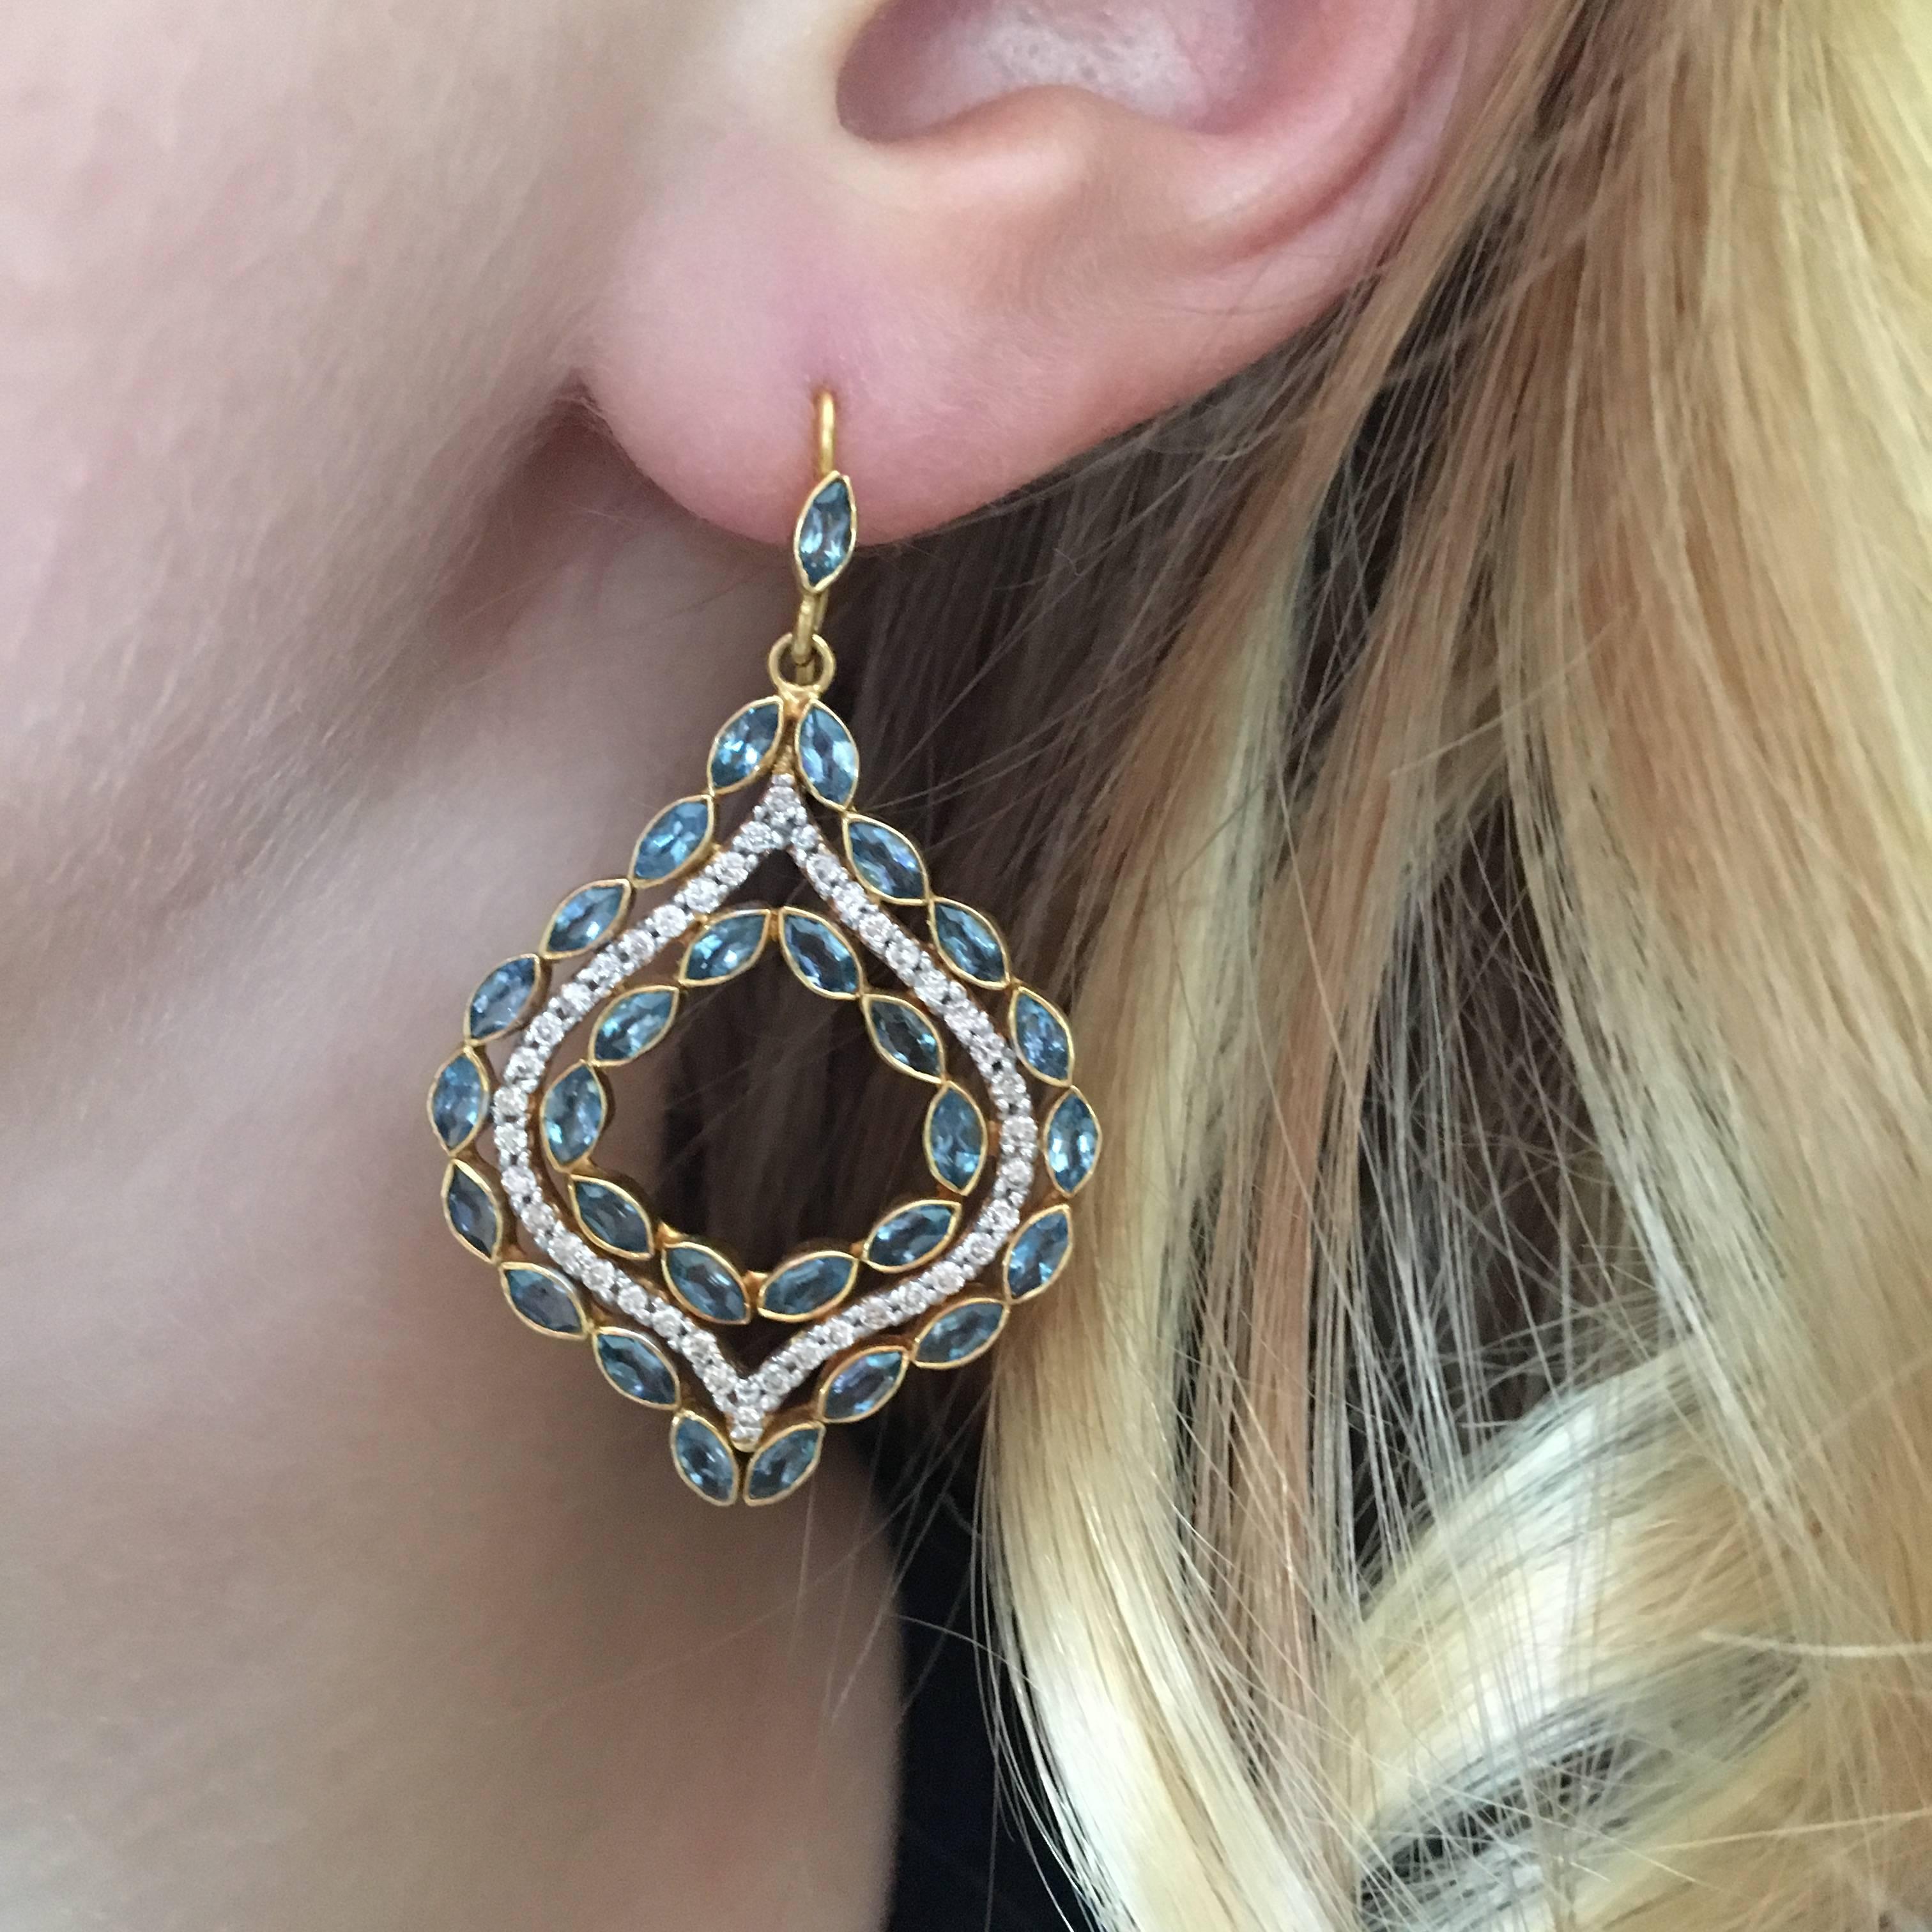 Elegant and lovely, these sparkly .76cts Diamond and Aquamarine Arabesque earrings are sure to get noticed!  Center channel of white diamonds framed by marquis shaped Aquamarines, all set in 18kt Gold in Lauren Harper's signature matte gold finish. 